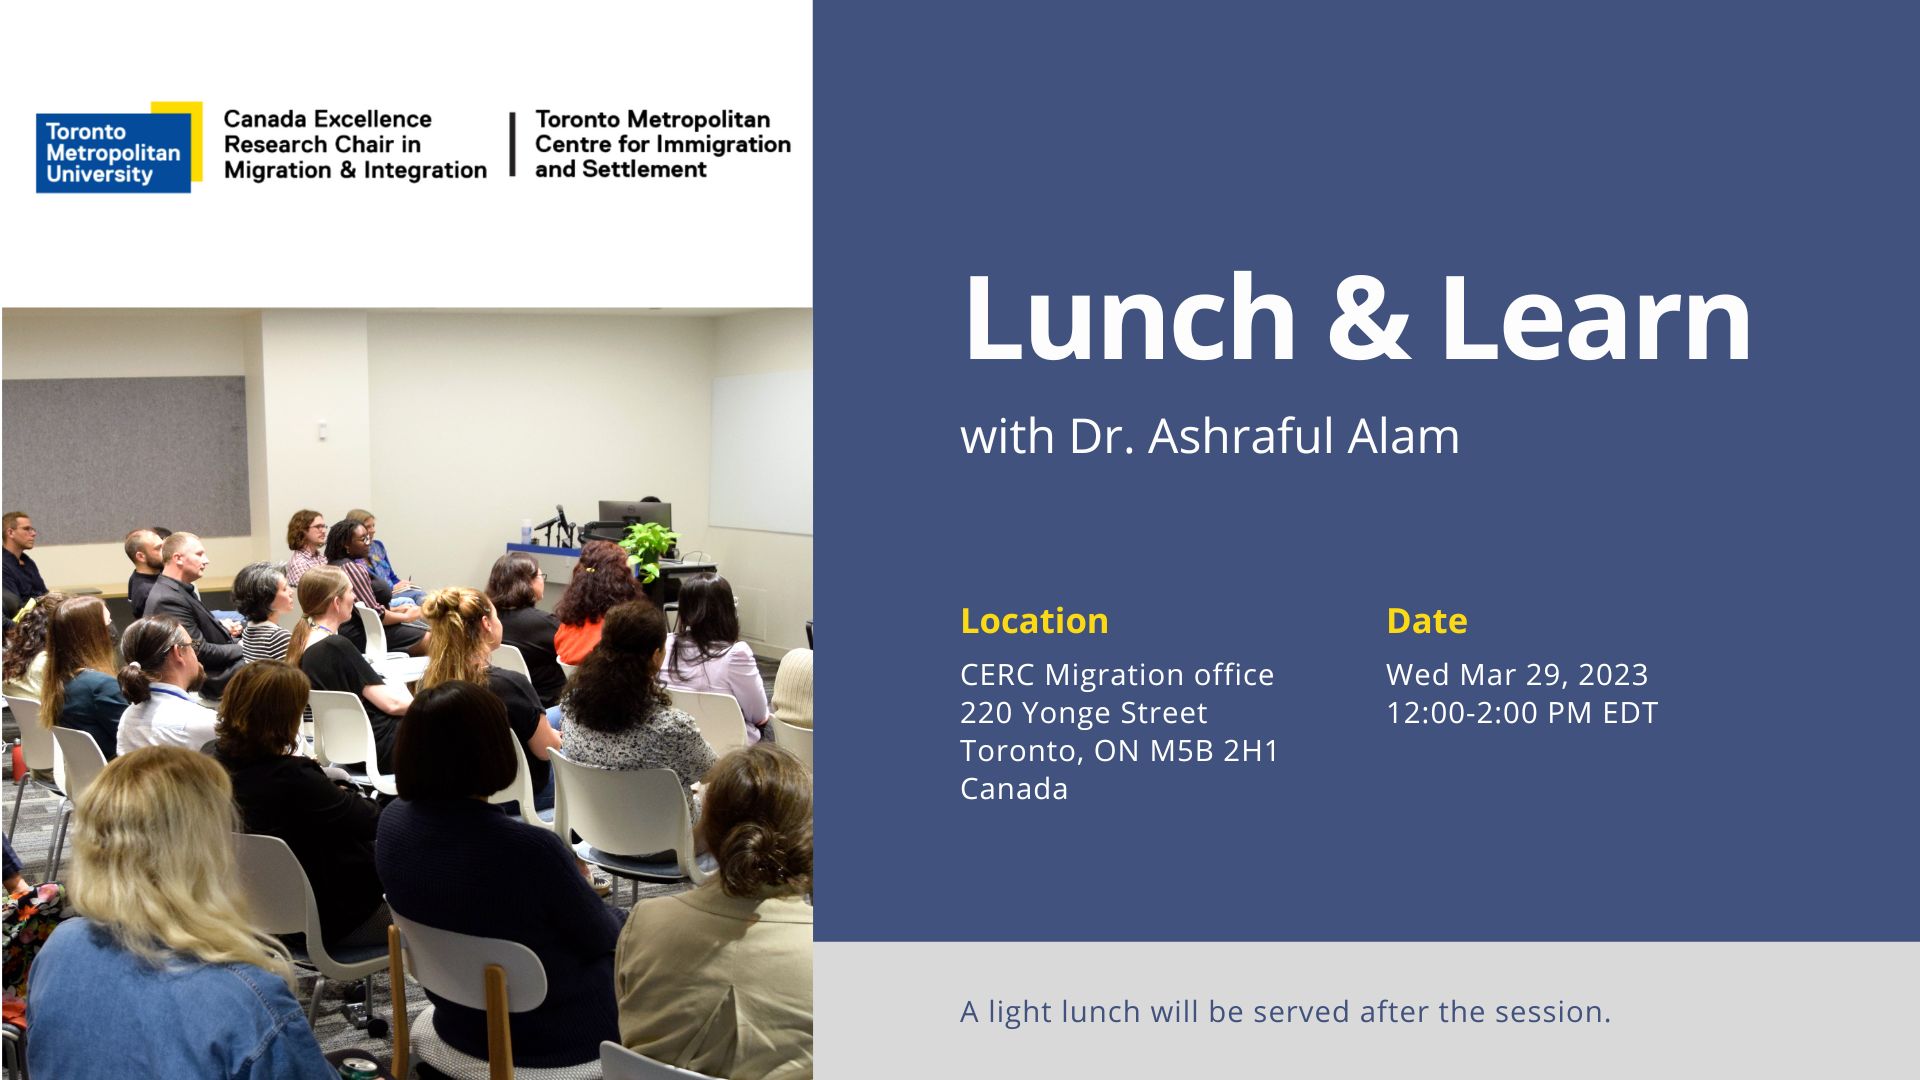 Lunch & Learn event with Dr. Ashraful Alam 